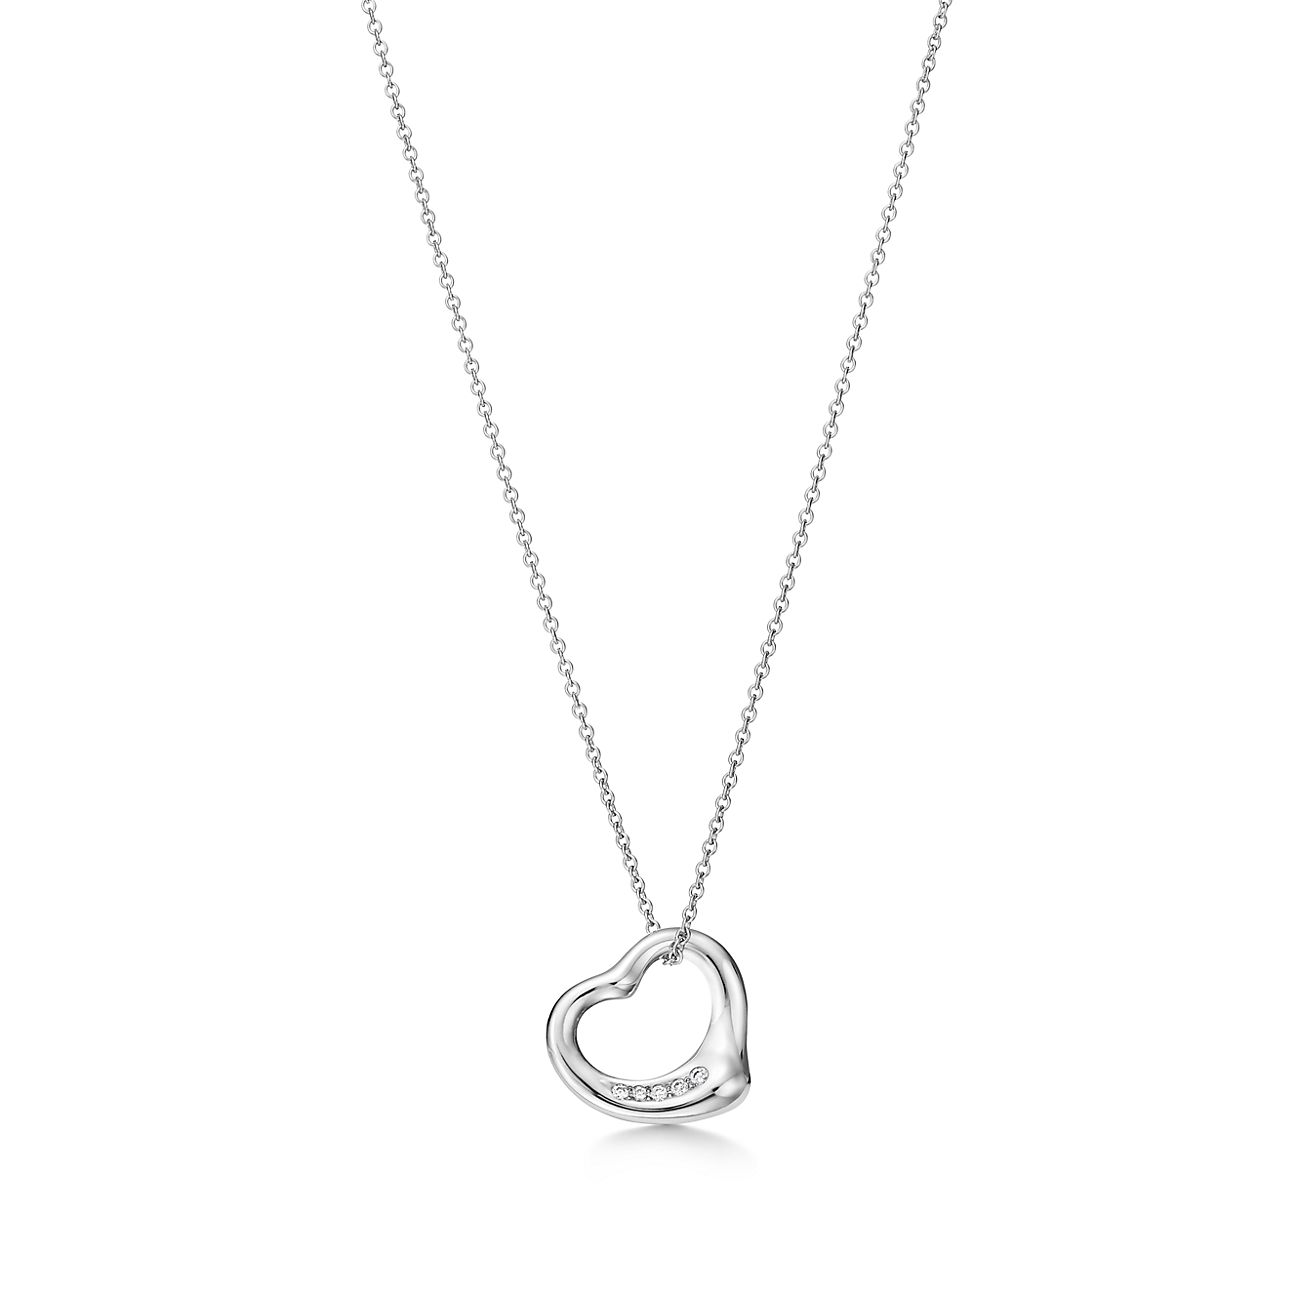 Tiffany & Co. Elsa Peretti Large Open Heart Gold Necklace | Pampillonia  Jewelers | Estate and Designer Jewelry